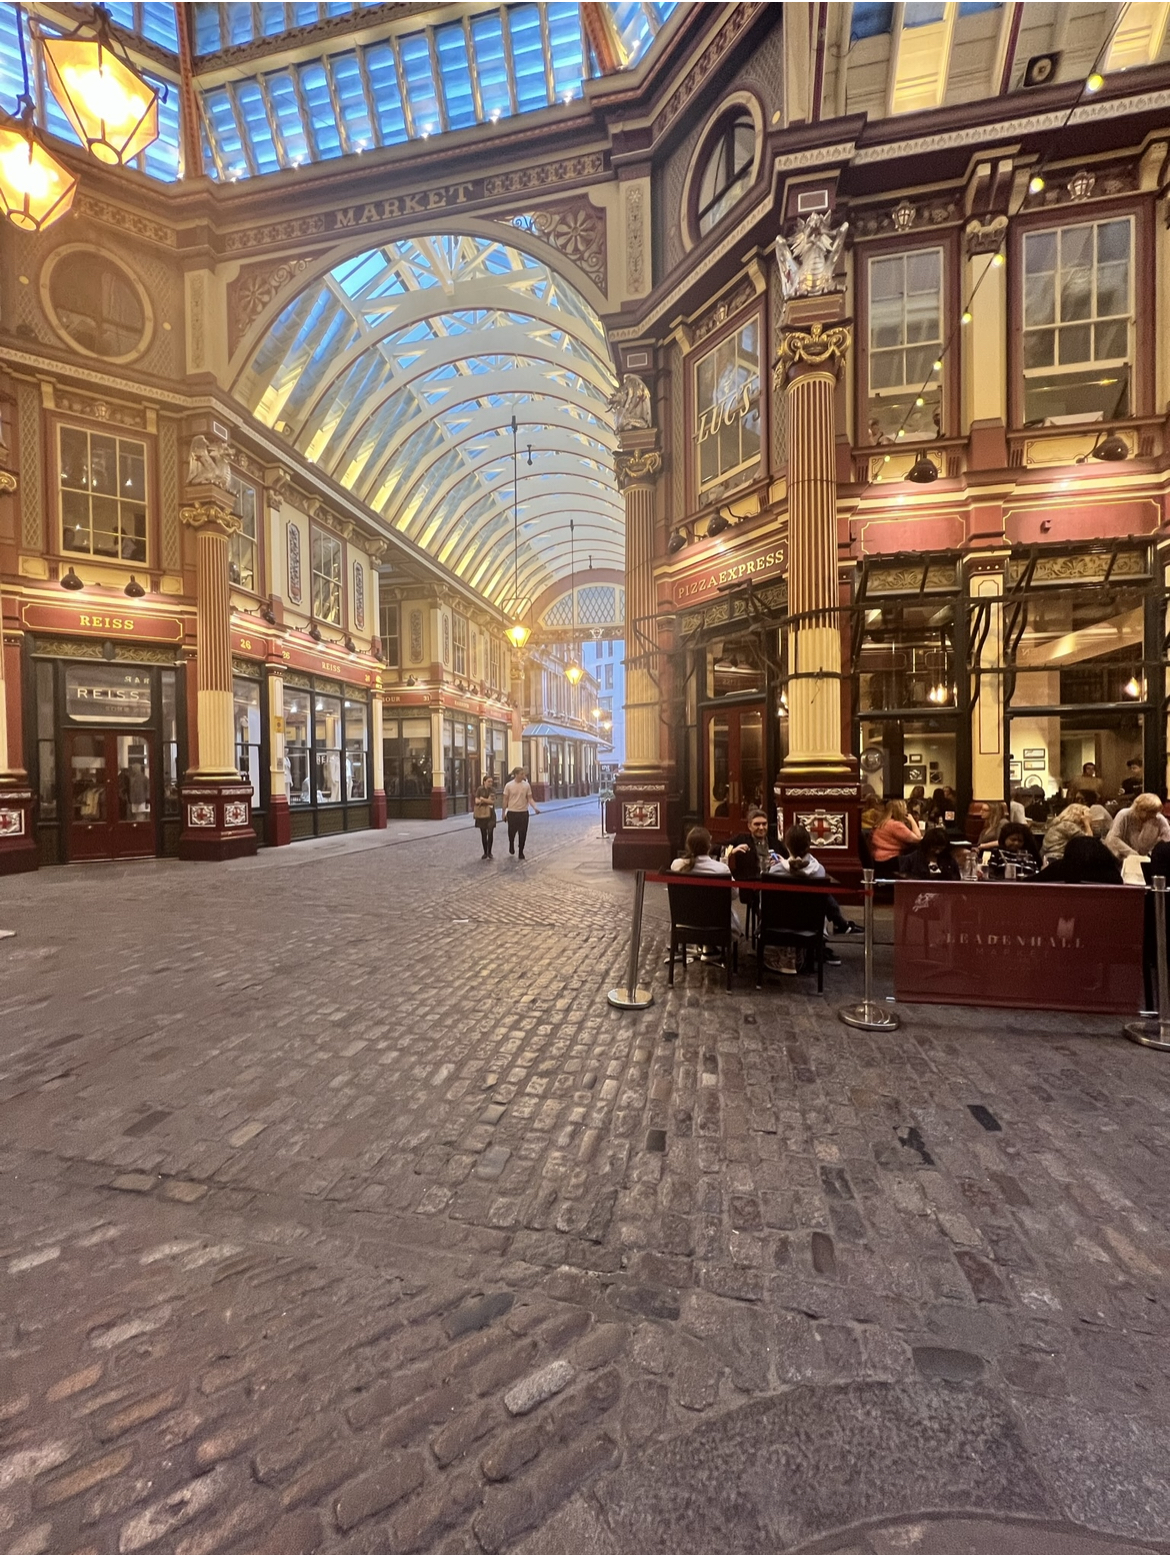 Leadenhall Market- one of the Harry Potter filming locations in London